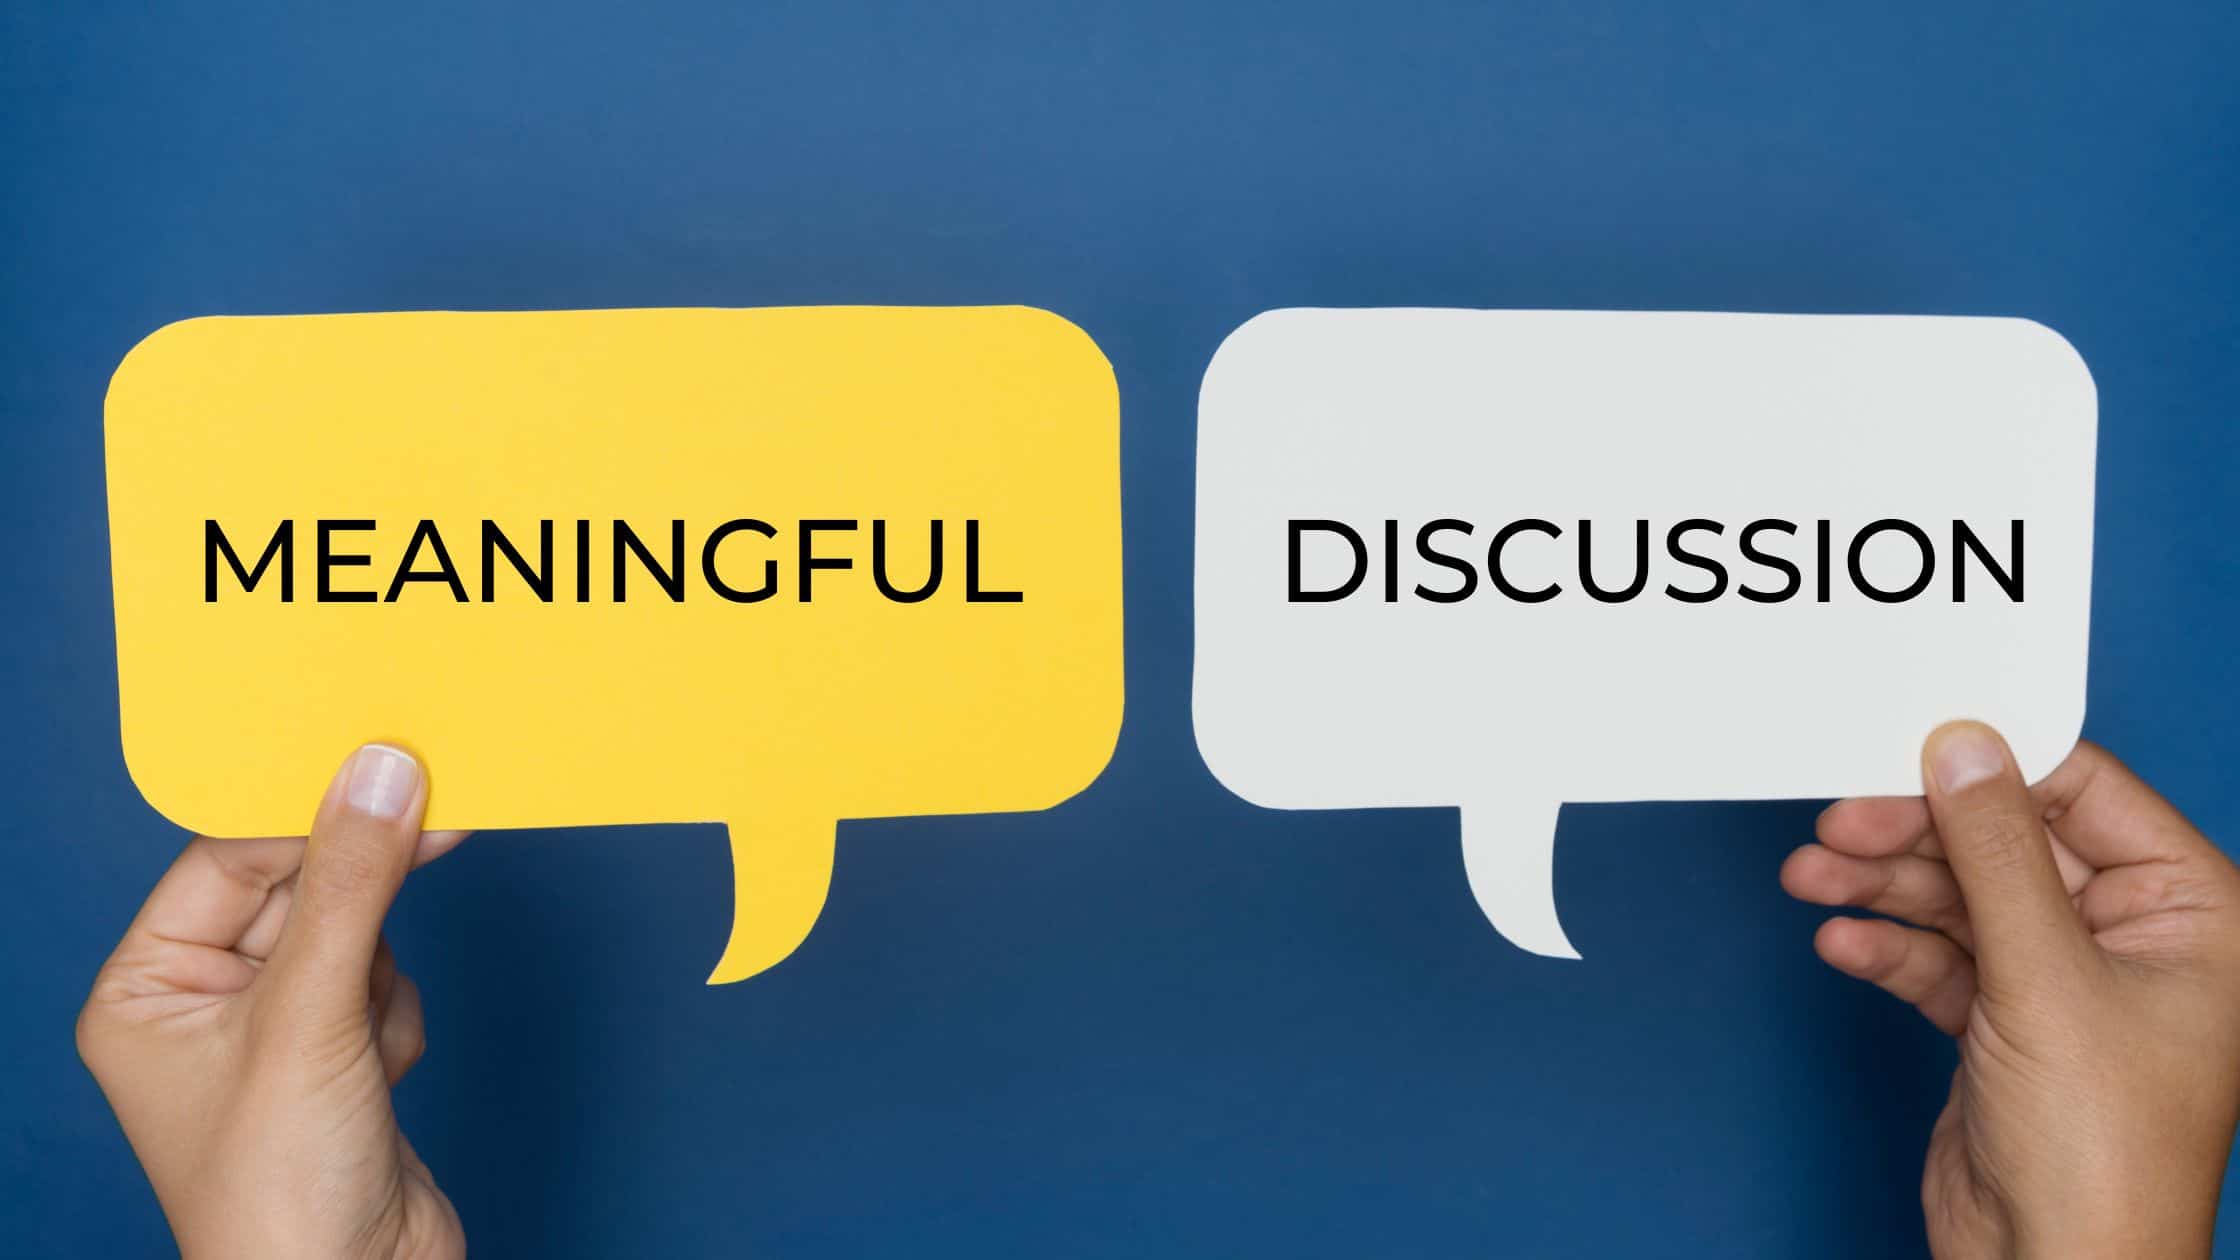 Focus on meaningful discussion